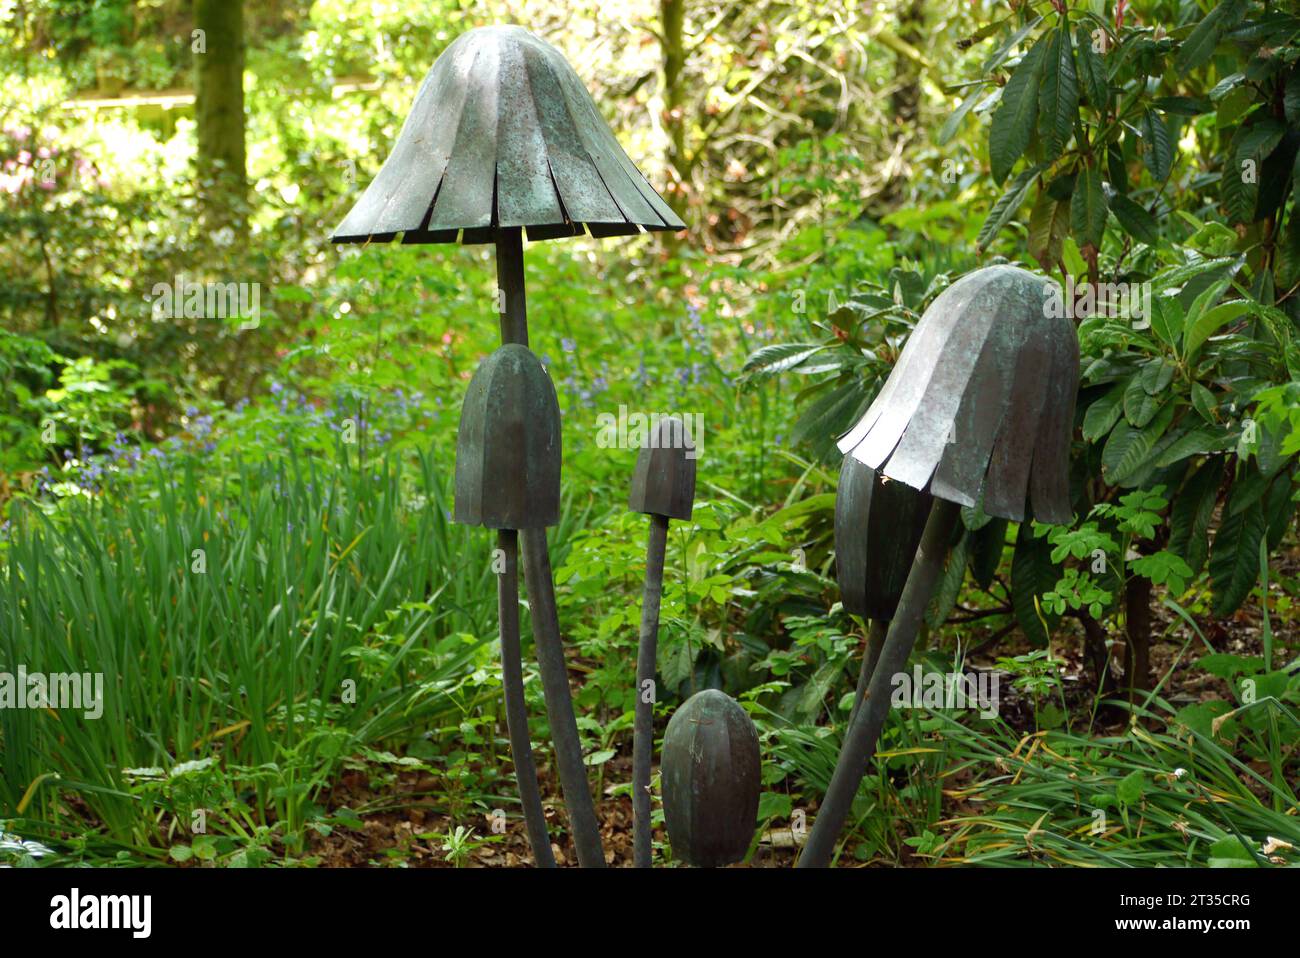 Steel Mushrooms in the Woods by Sculptors Antony Sturgiss & Steve Blaylock in the Himalayan Garden & Sculpture Park, North Yorkshire, England, UK. Stock Photo